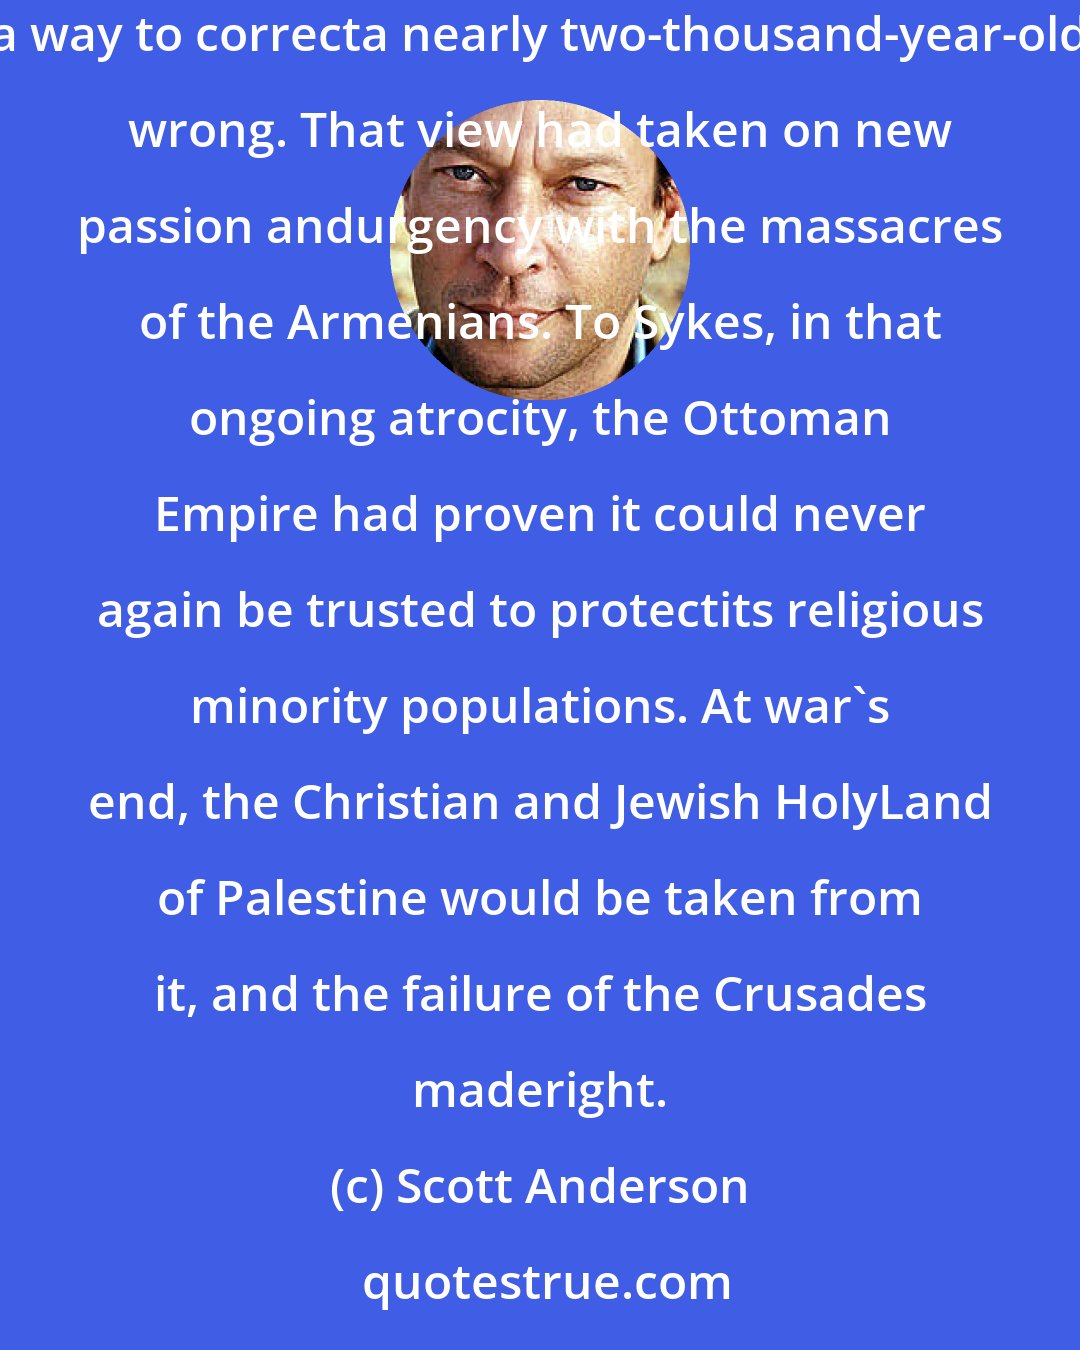 Scott Anderson: Part of Sykes's motive was rooted in religiosity. A devout Catholic, he regarded a return of the ancient tribe of Israel to the Holy Land as a way to correcta nearly two-thousand-year-old wrong. That view had taken on new passion andurgency with the massacres of the Armenians. To Sykes, in that ongoing atrocity, the Ottoman Empire had proven it could never again be trusted to protectits religious minority populations. At war's end, the Christian and Jewish HolyLand of Palestine would be taken from it, and the failure of the Crusades maderight.